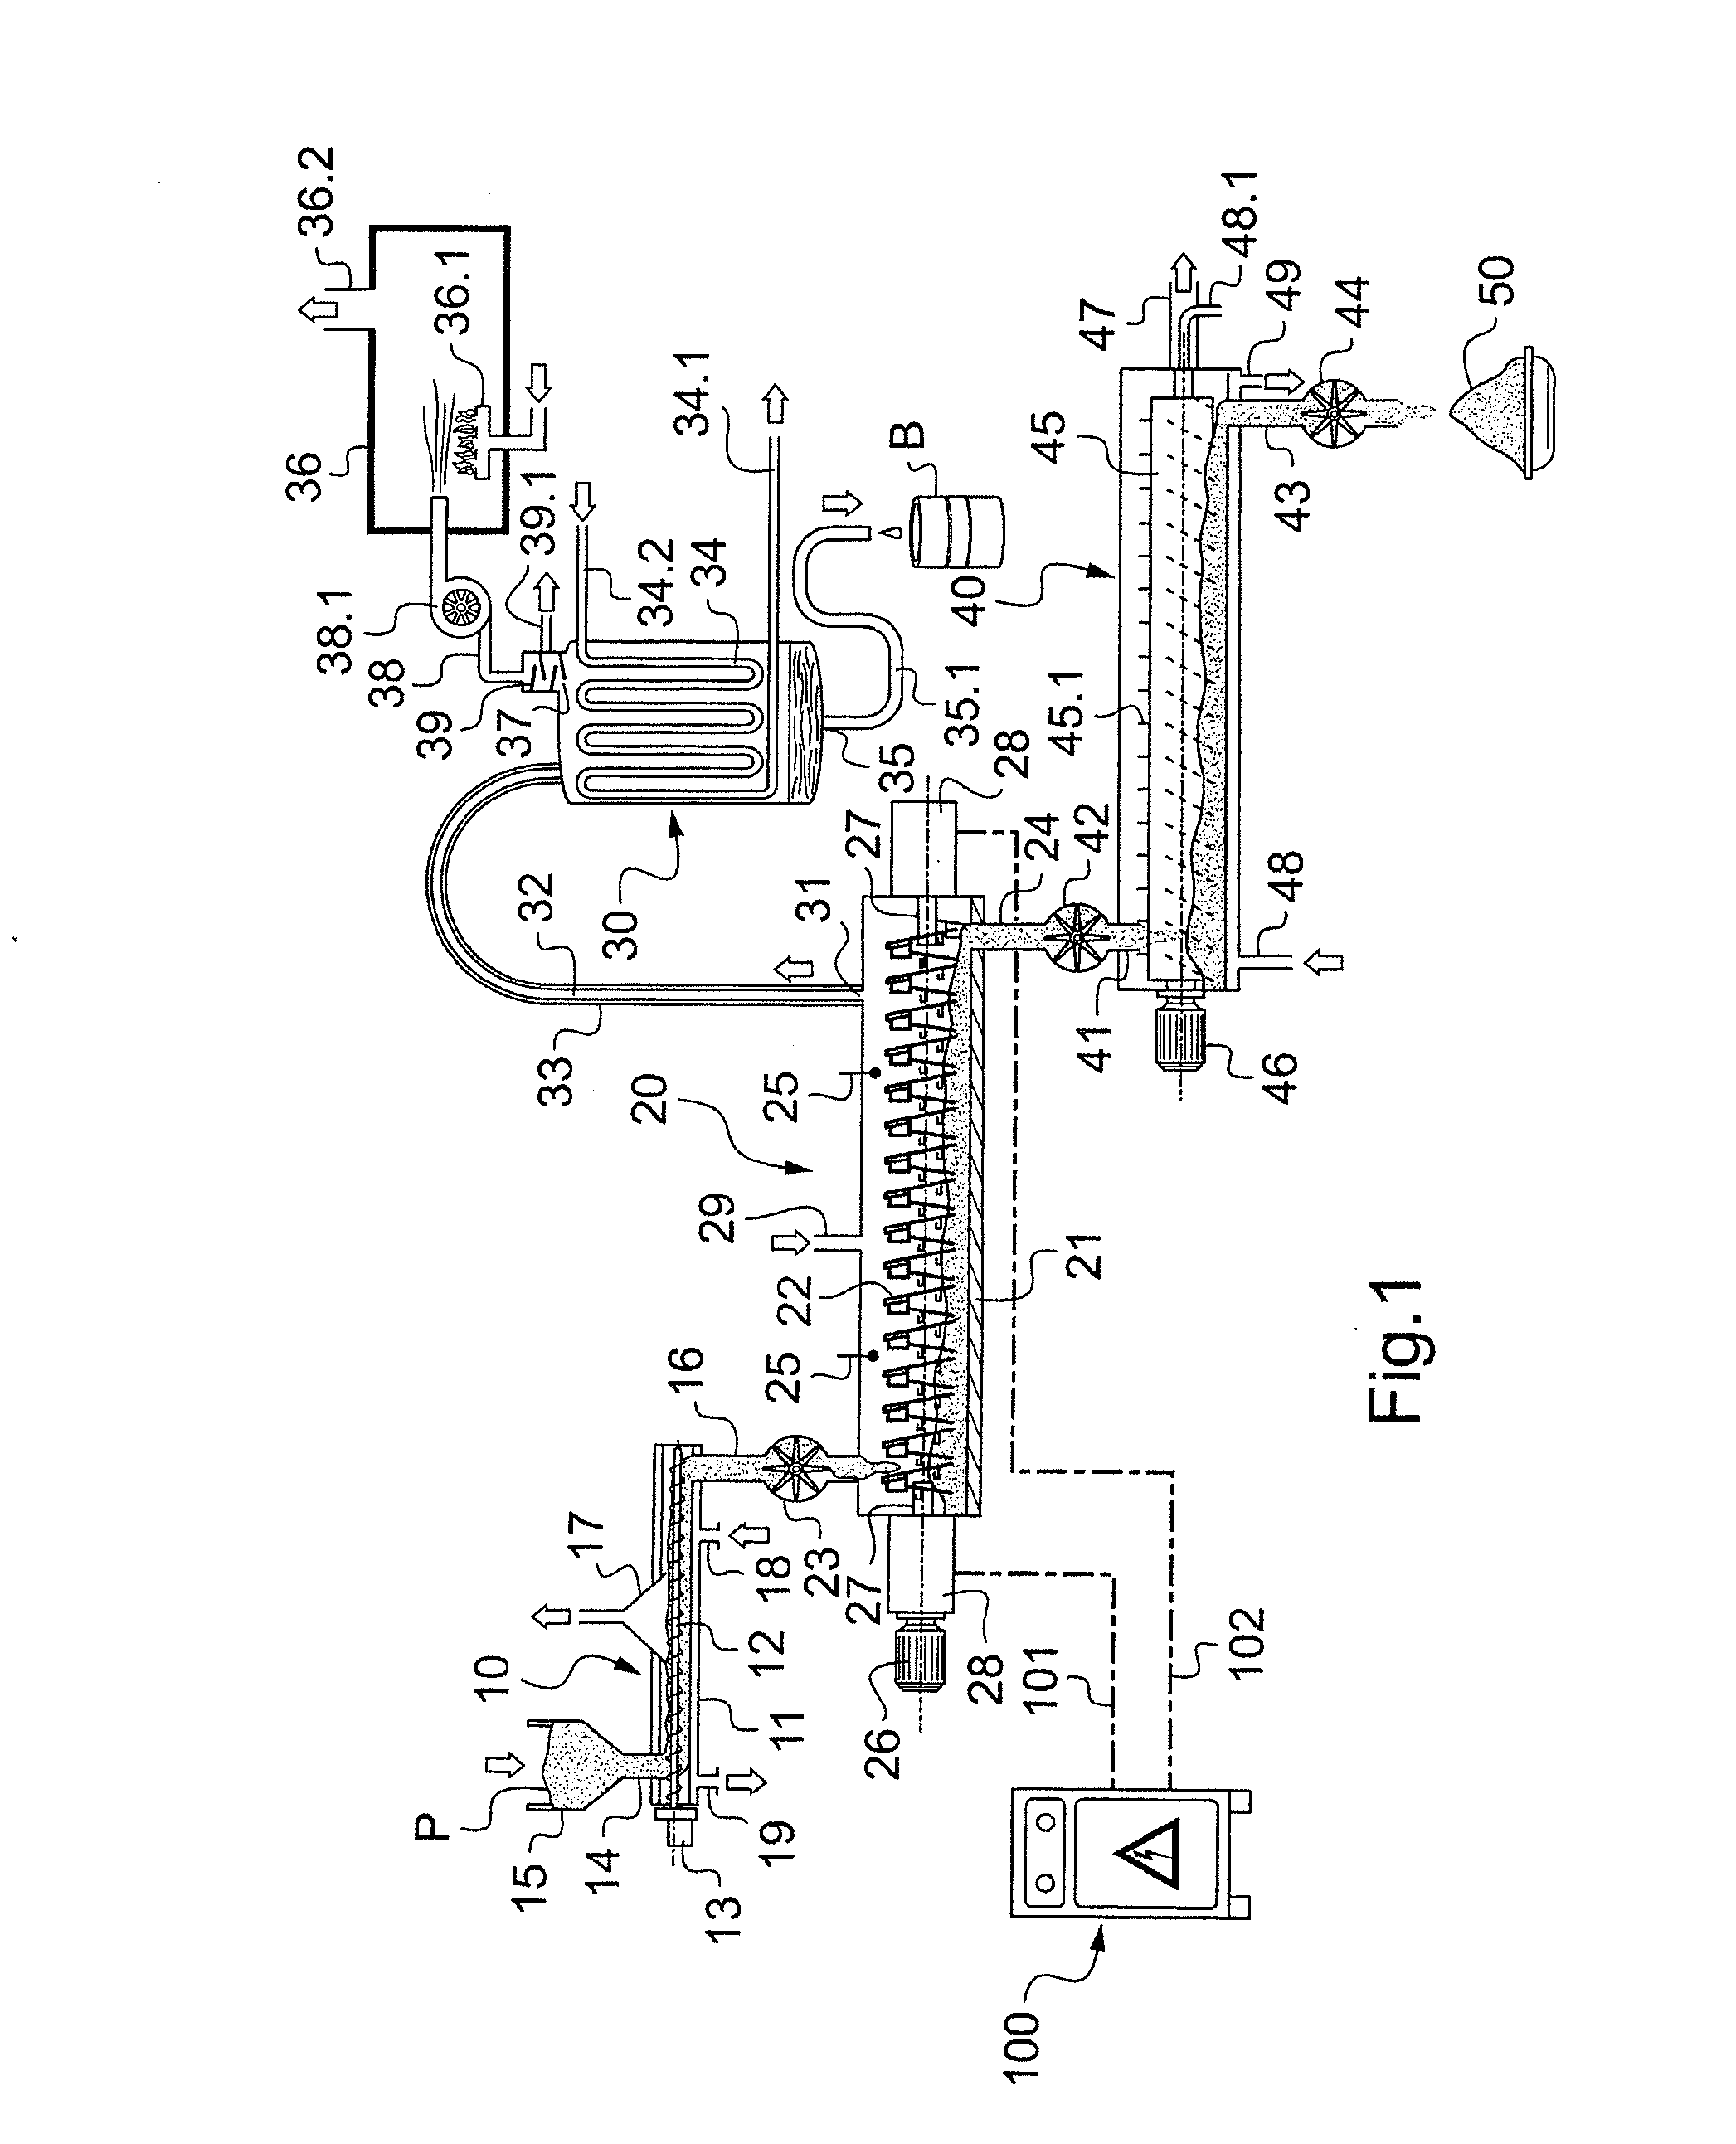 Method and apparatus for the energy densification of a material in the form of divided solids, with a view to obtaining pyrolysis oils for energy purposes